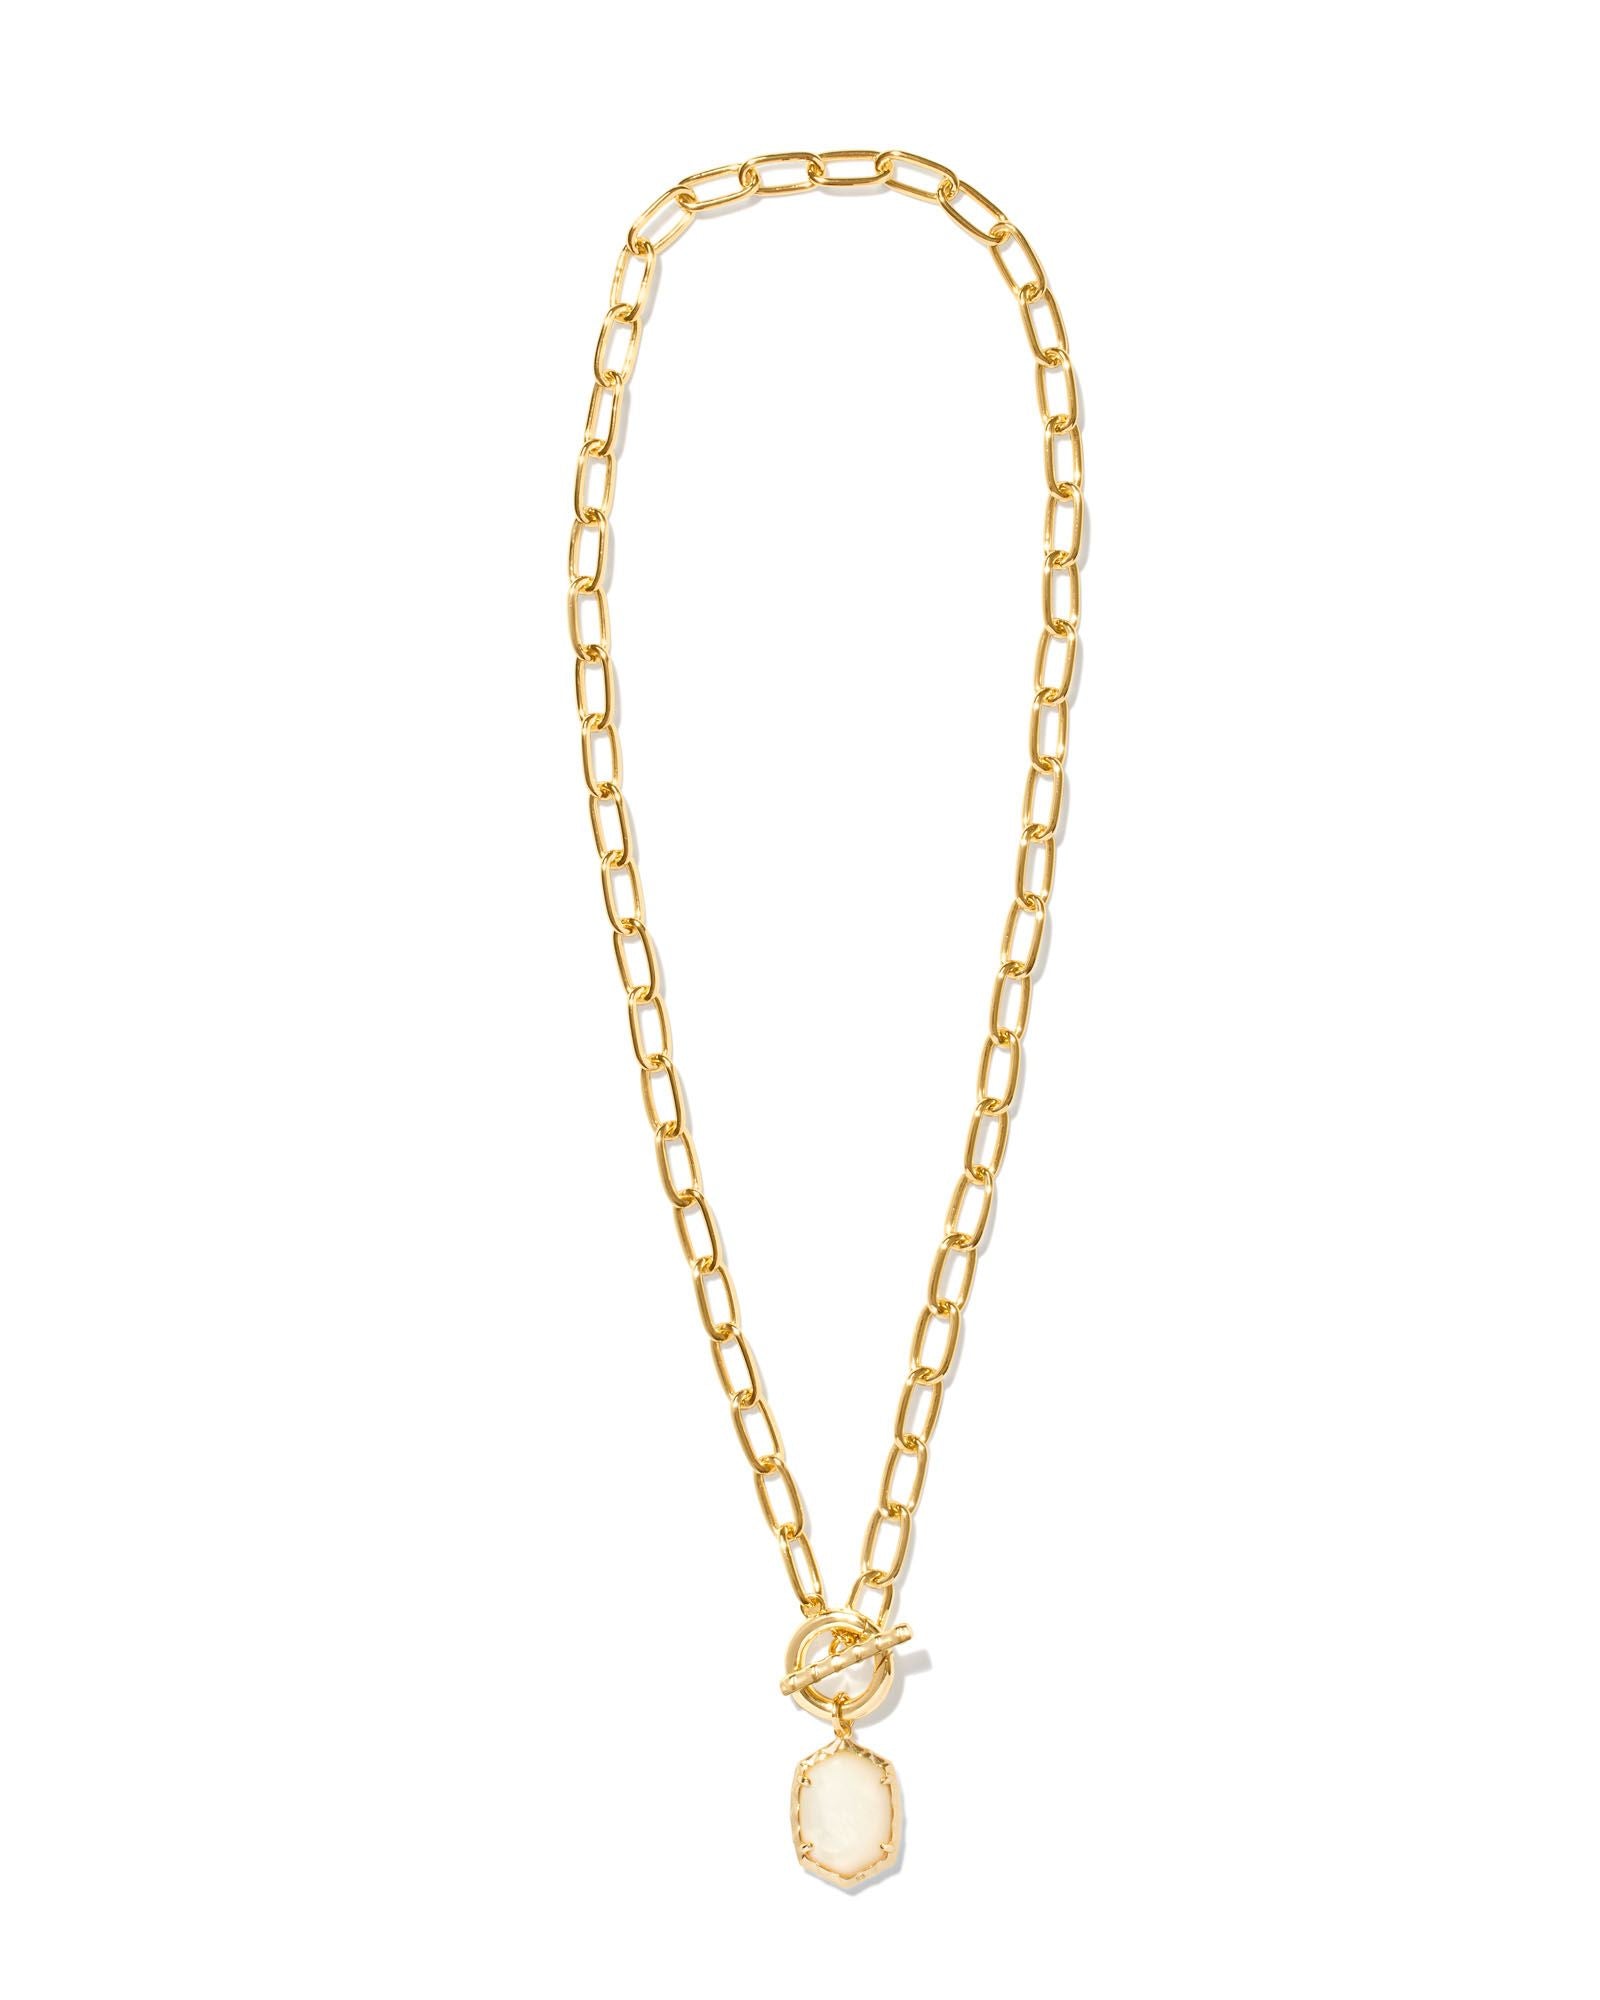 Daphne Gold Link and Chain Necklace Ivory MOP